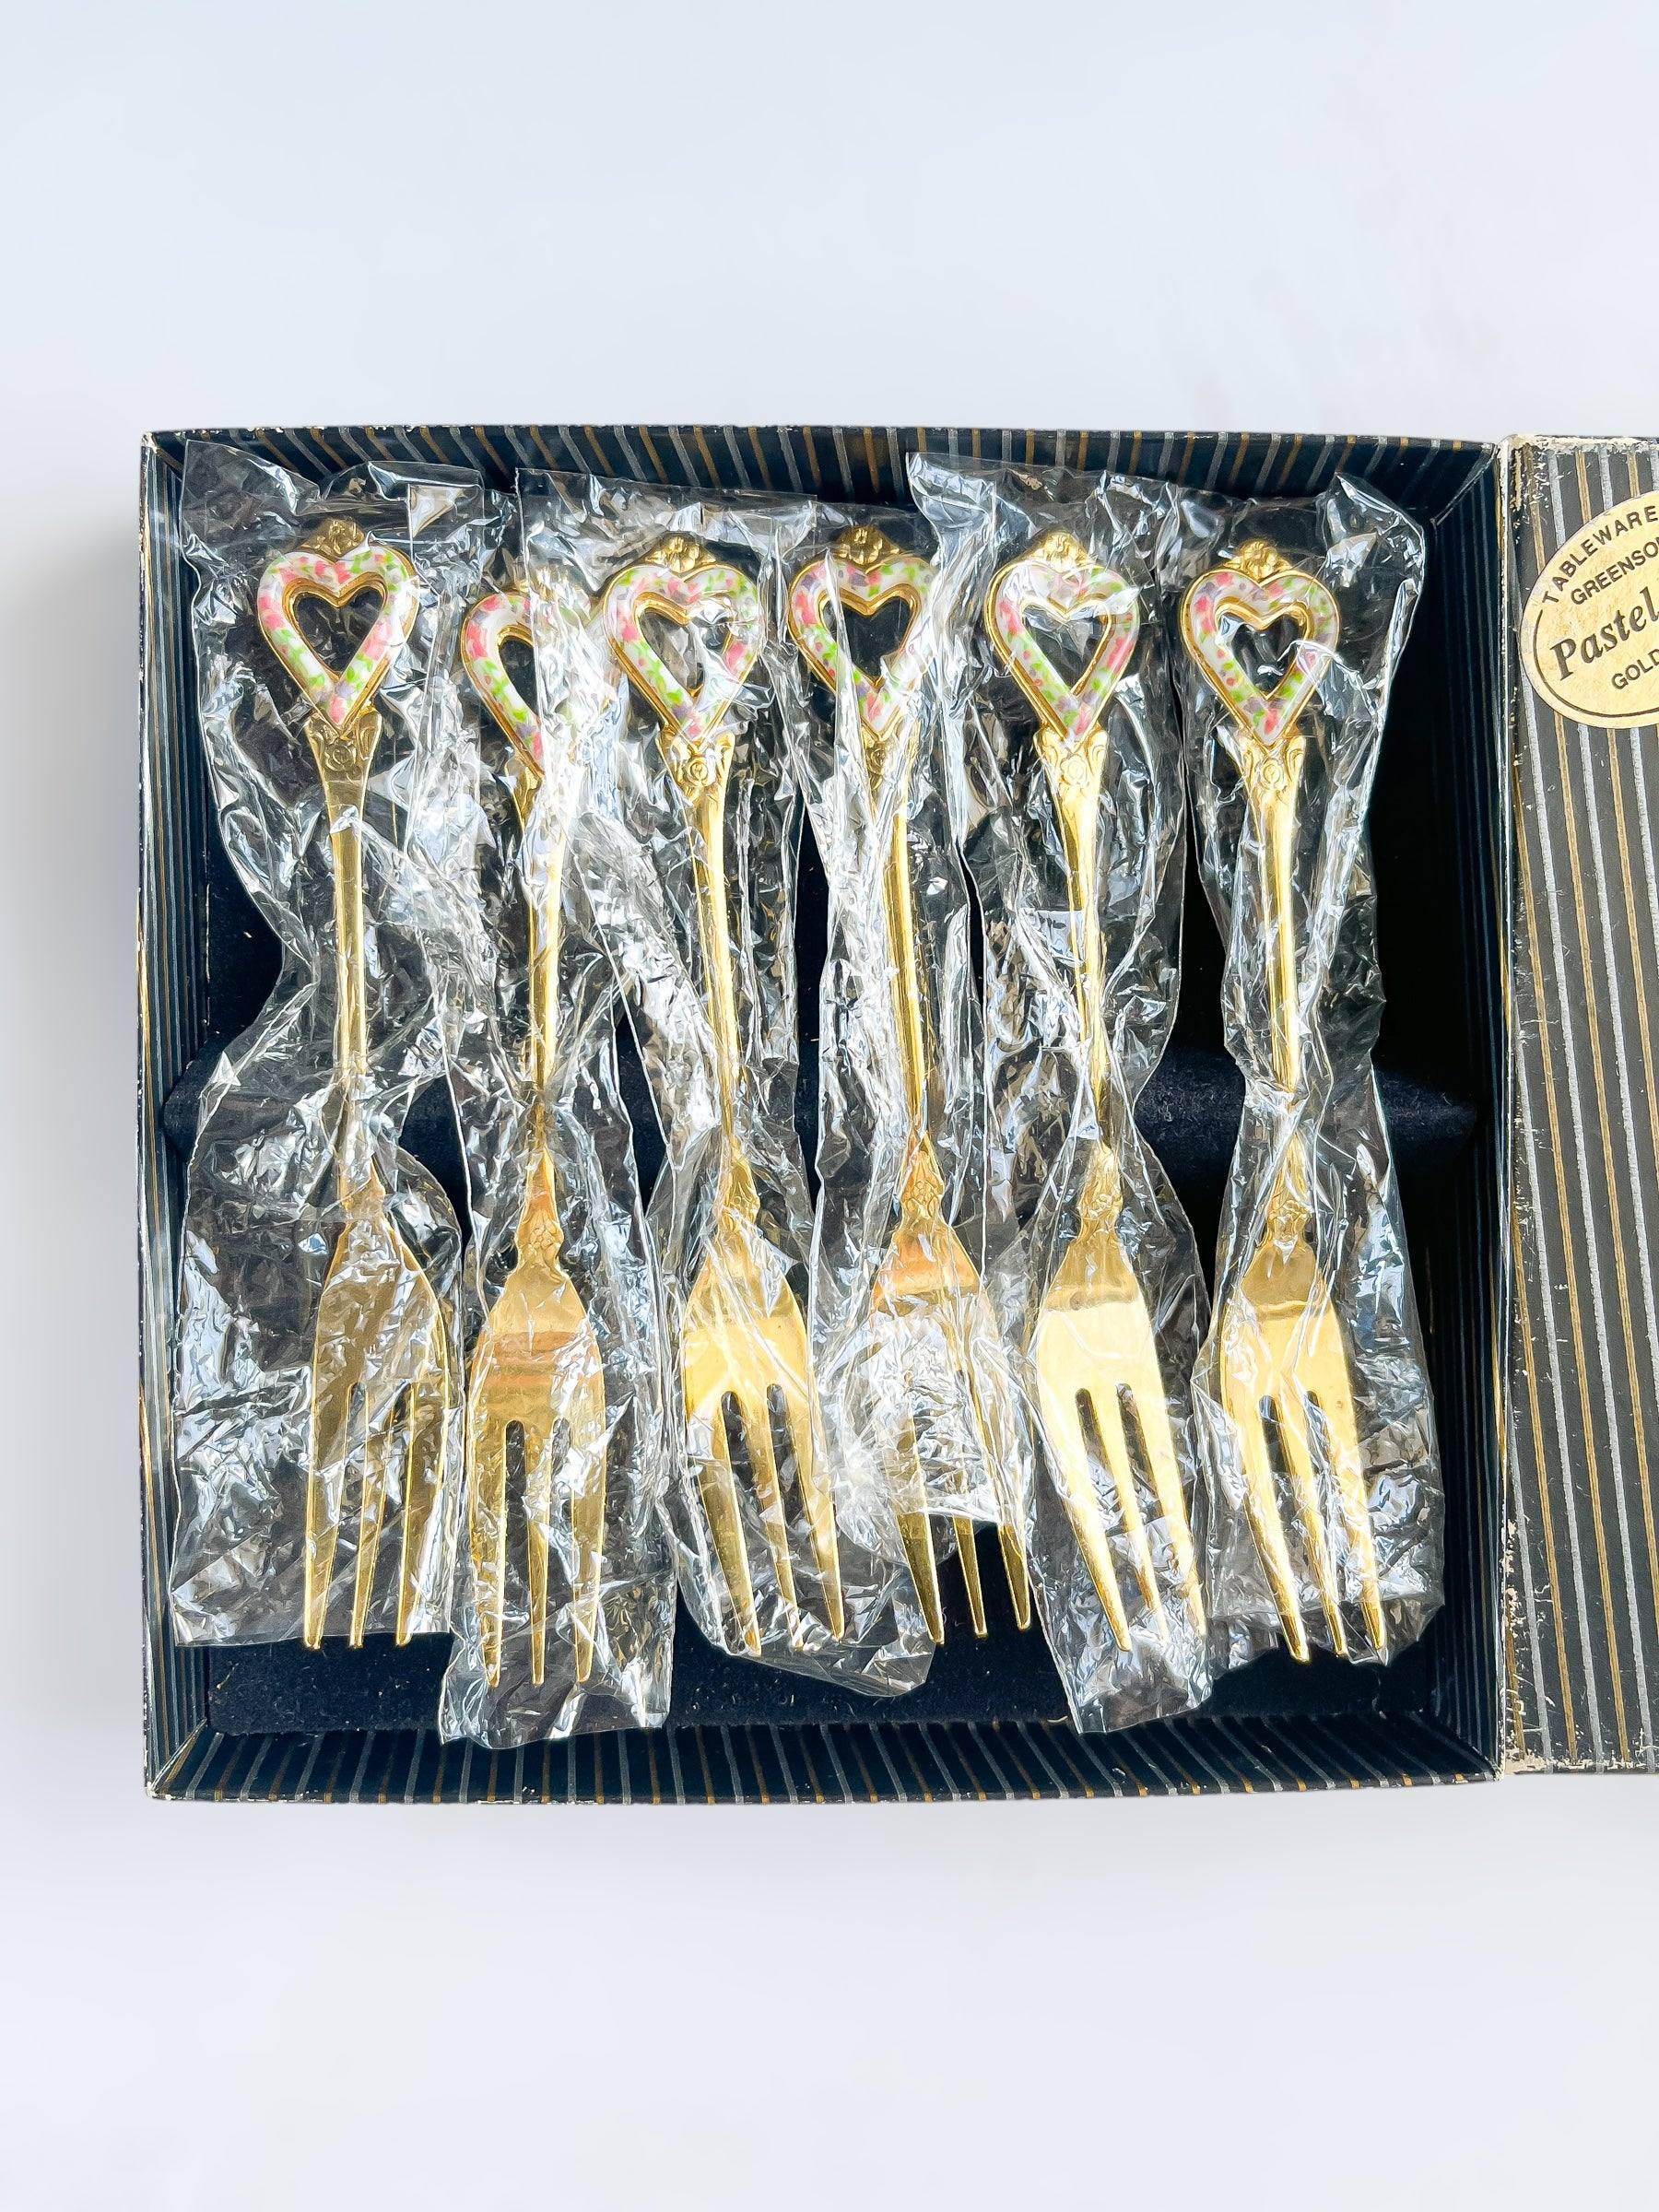 Greensons Set of 6 Gold-Plated Cake Forks - 'Pastel Rose' Collection - SOSC Home